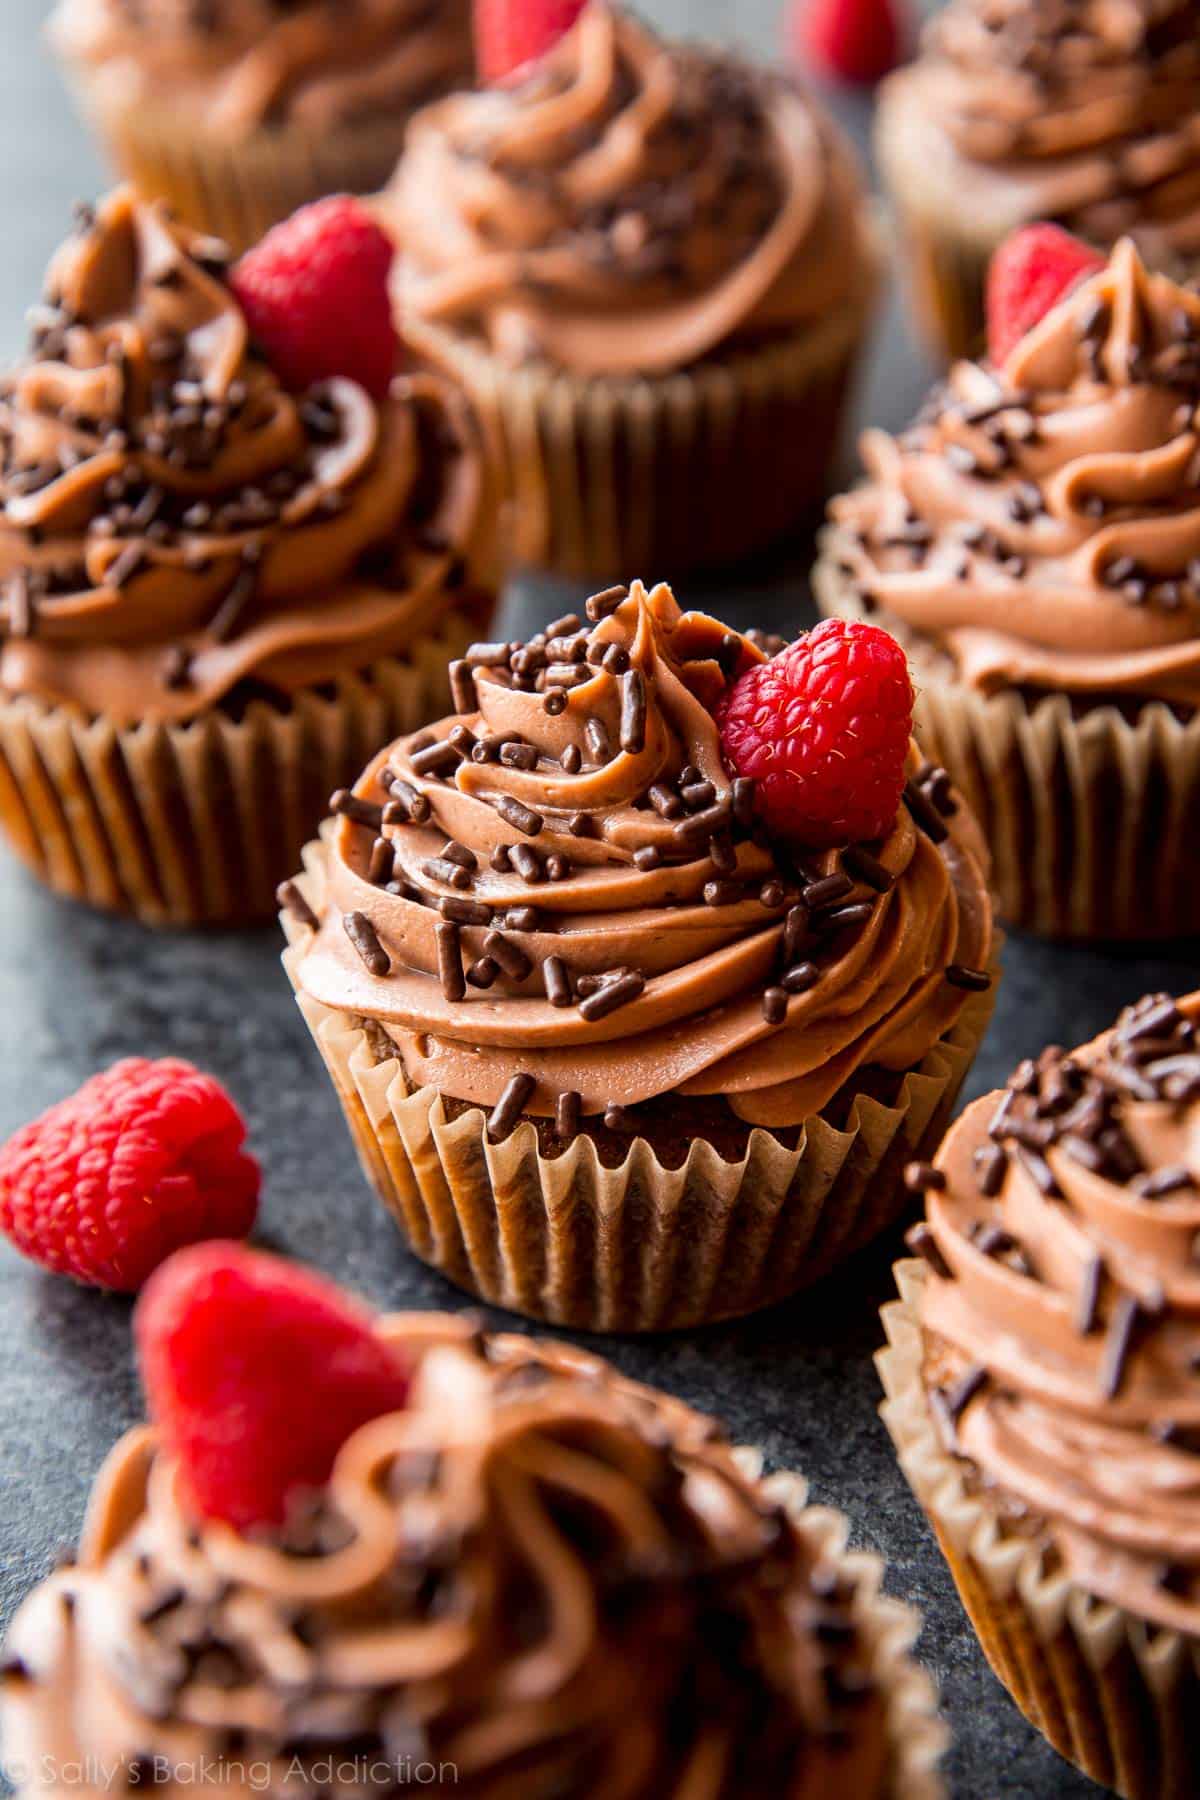 mocha Nutella cupcakes with Nutella frosting and chocolate sprinkles